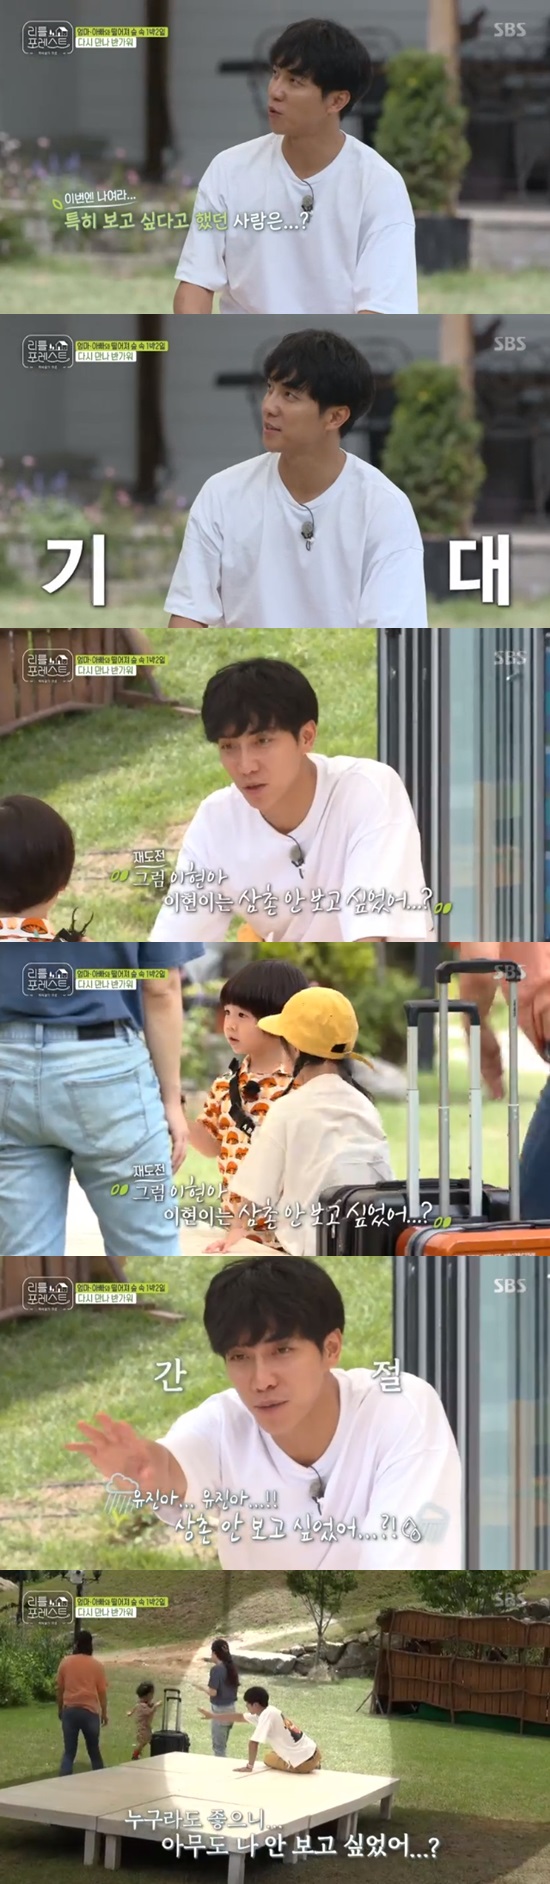 Lee Seung-gi laughed, hoping to pay attention to Littleies.Lee Seung-gi showed the joy of meeting with Little Lee again on SBS Little Forest broadcast on August 26th.Lee Seung-gi asked her mothers, Didnt you say you didnt want to go? when Mai-hyun (4) Choi Yu-jin (4) arrived in turn.Ive talked to her about wanting to come here a hundred times before she came, said Myhyeons mother.Lee Seung-gi asked, Did you want to see The Uncle? My Hyun said, Where did Lee go?Lee Seung-gi asked Choi Yu-jins mother the same question, and Choi Yu-jin said, I told her that Eugene wanted to see it.Lee Seung-gi also asked, Who especially wanted to see? And asked, I wanted my name to come out, but Choi Yu-jins mother said, I want to see a child dressed in bananas. Yoo Gyeong-sang